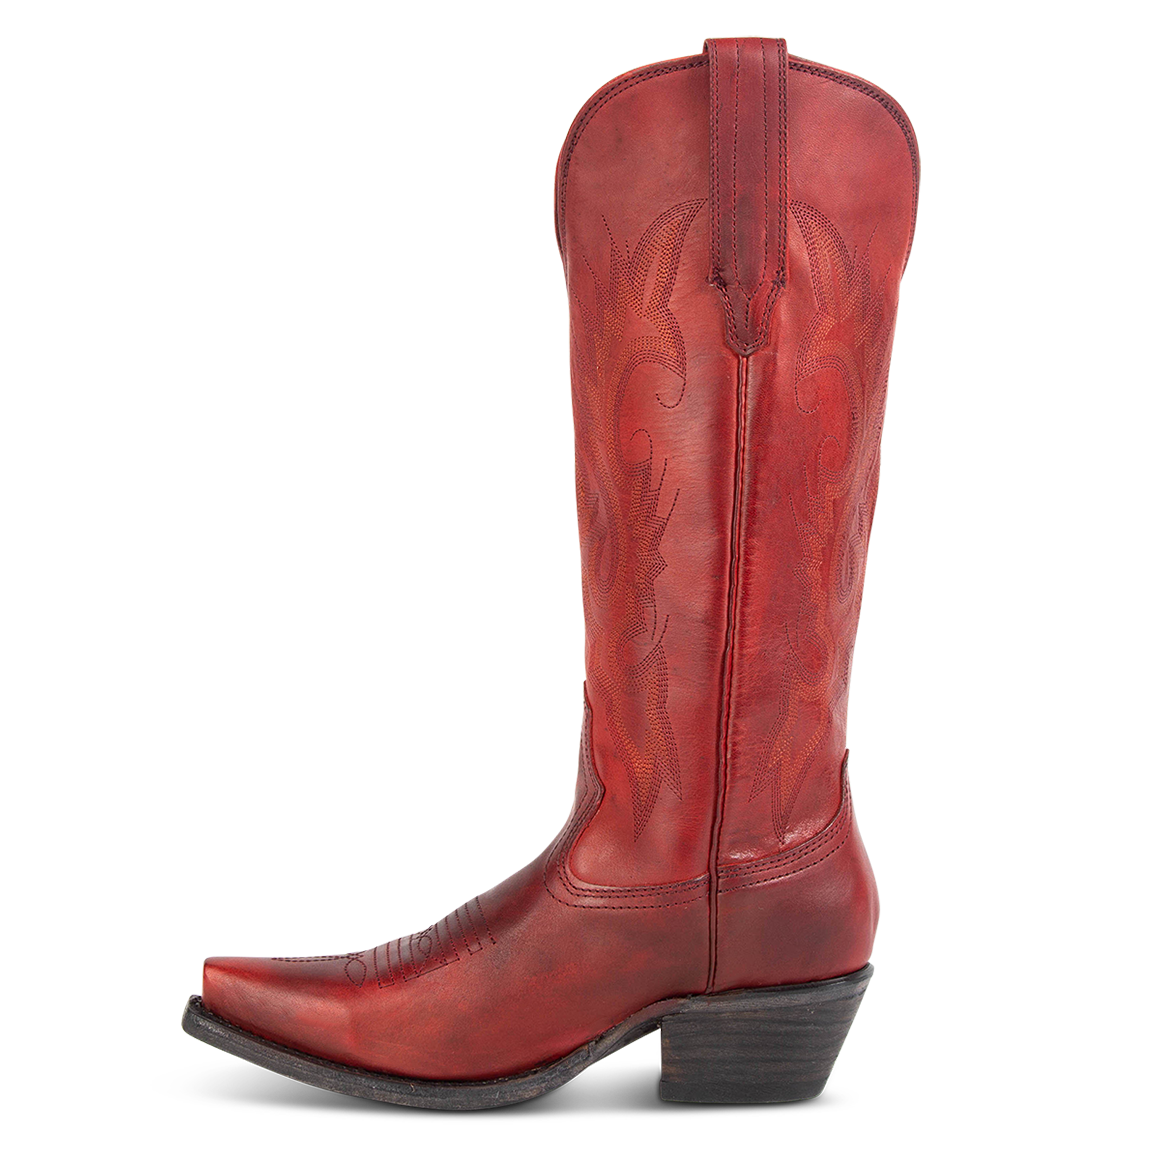 Side view showing leather pull straps and western stitch detailing on FREEBIRD women's Woodland red leather boot